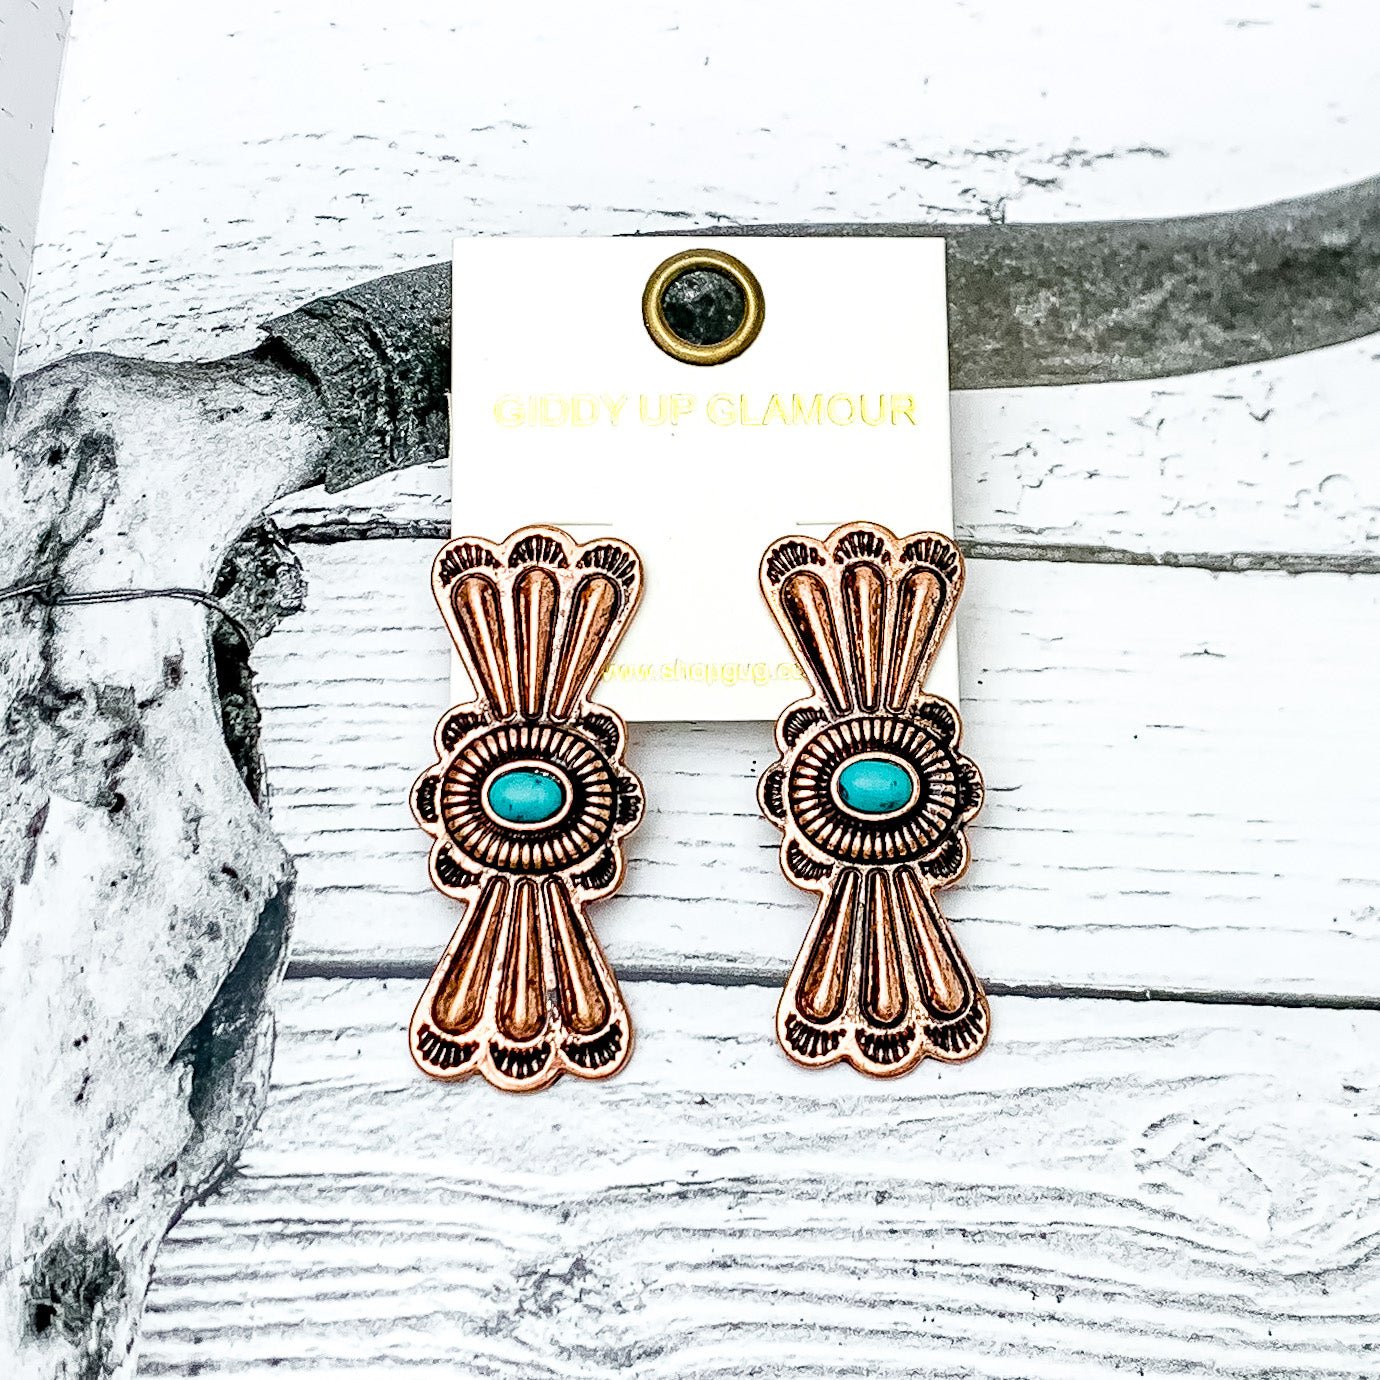 Lucky Break Hour-Glass Shaped Earrings in Copper Tone with Faux Turquoise Stone. Pictured on a wood like background with a longhorn on it.